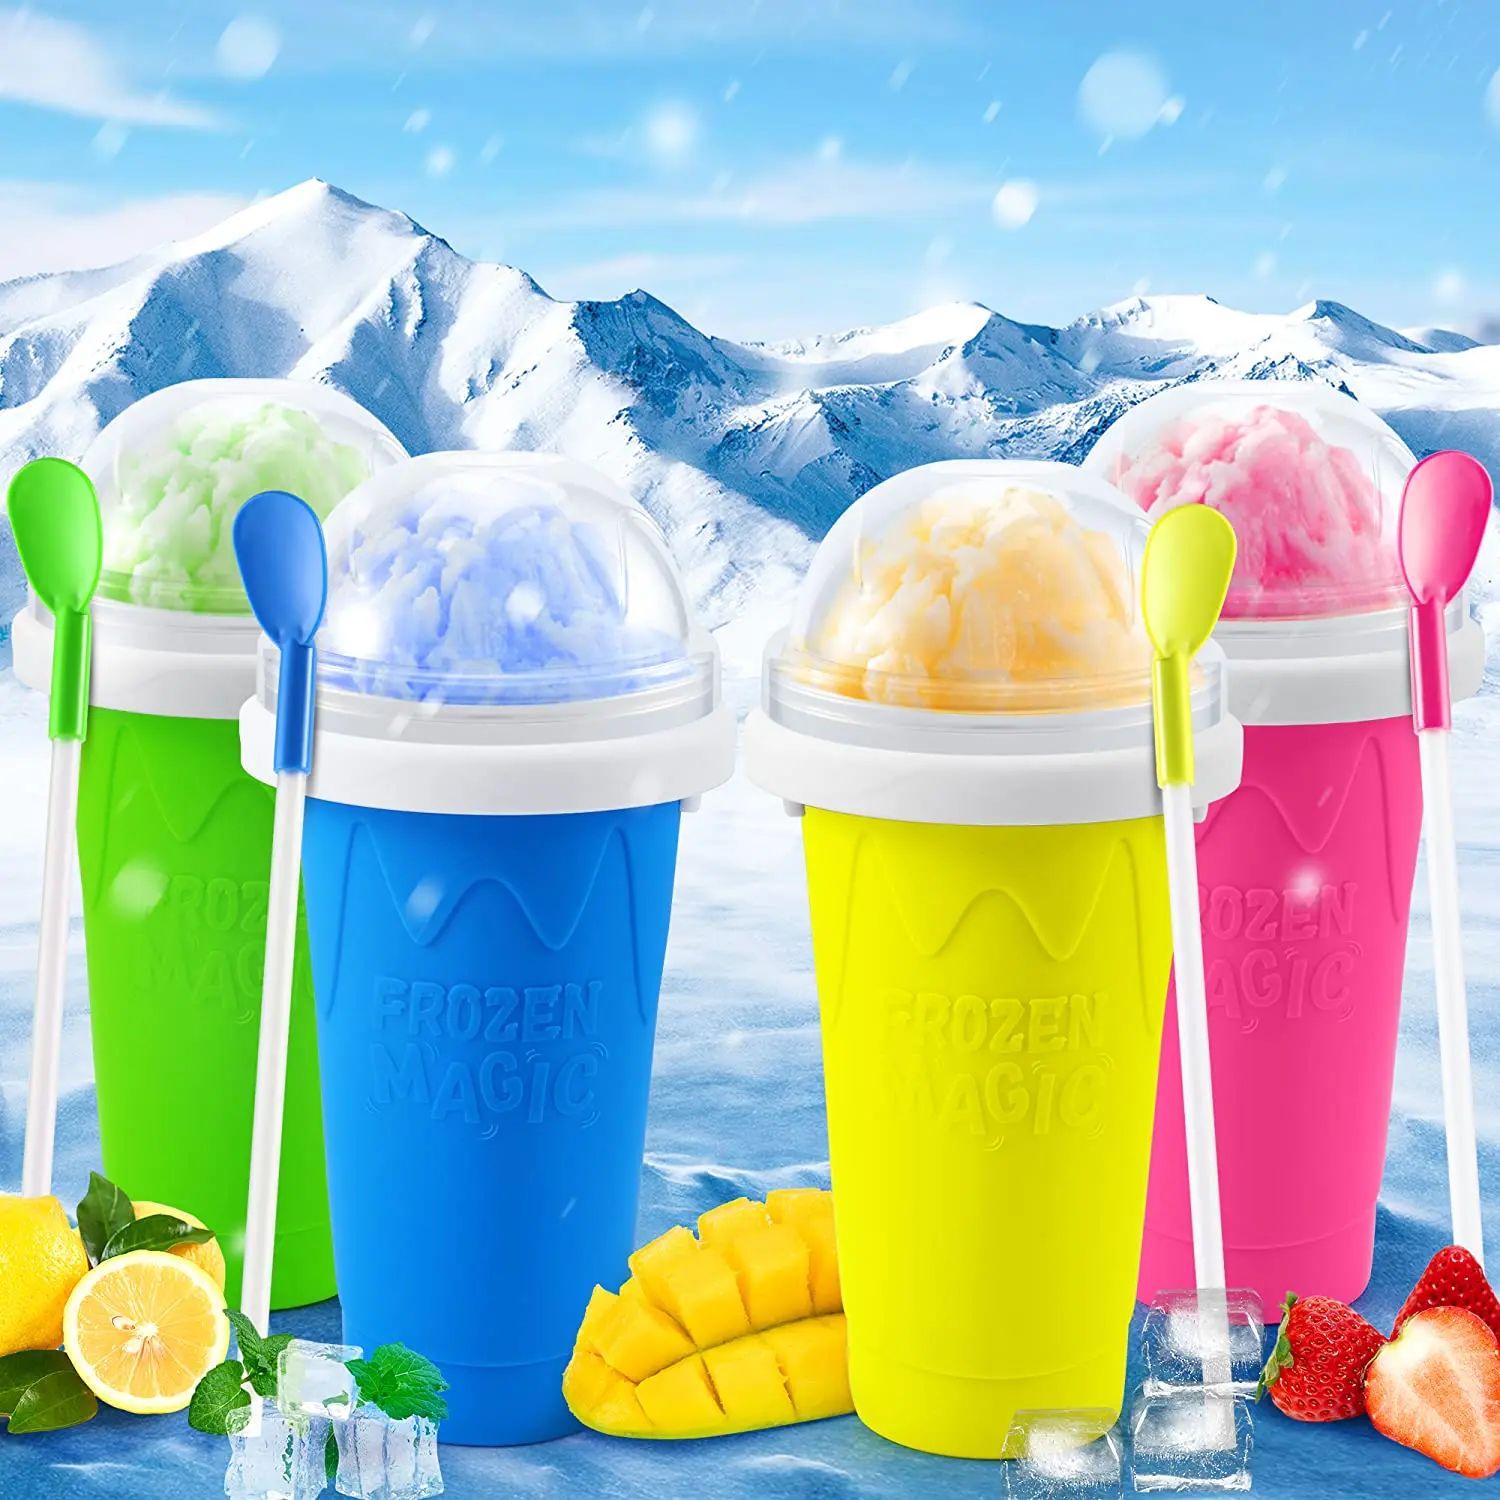 Homemade Milk Shake Ice Cream Maker,2 in1 Cooling Cup Dubbellaags Squeeze Cup Slushy Maker Blue Magic Quick Frozen Smoothies Cup Portable Squeeze Ice Cup for Everyone 